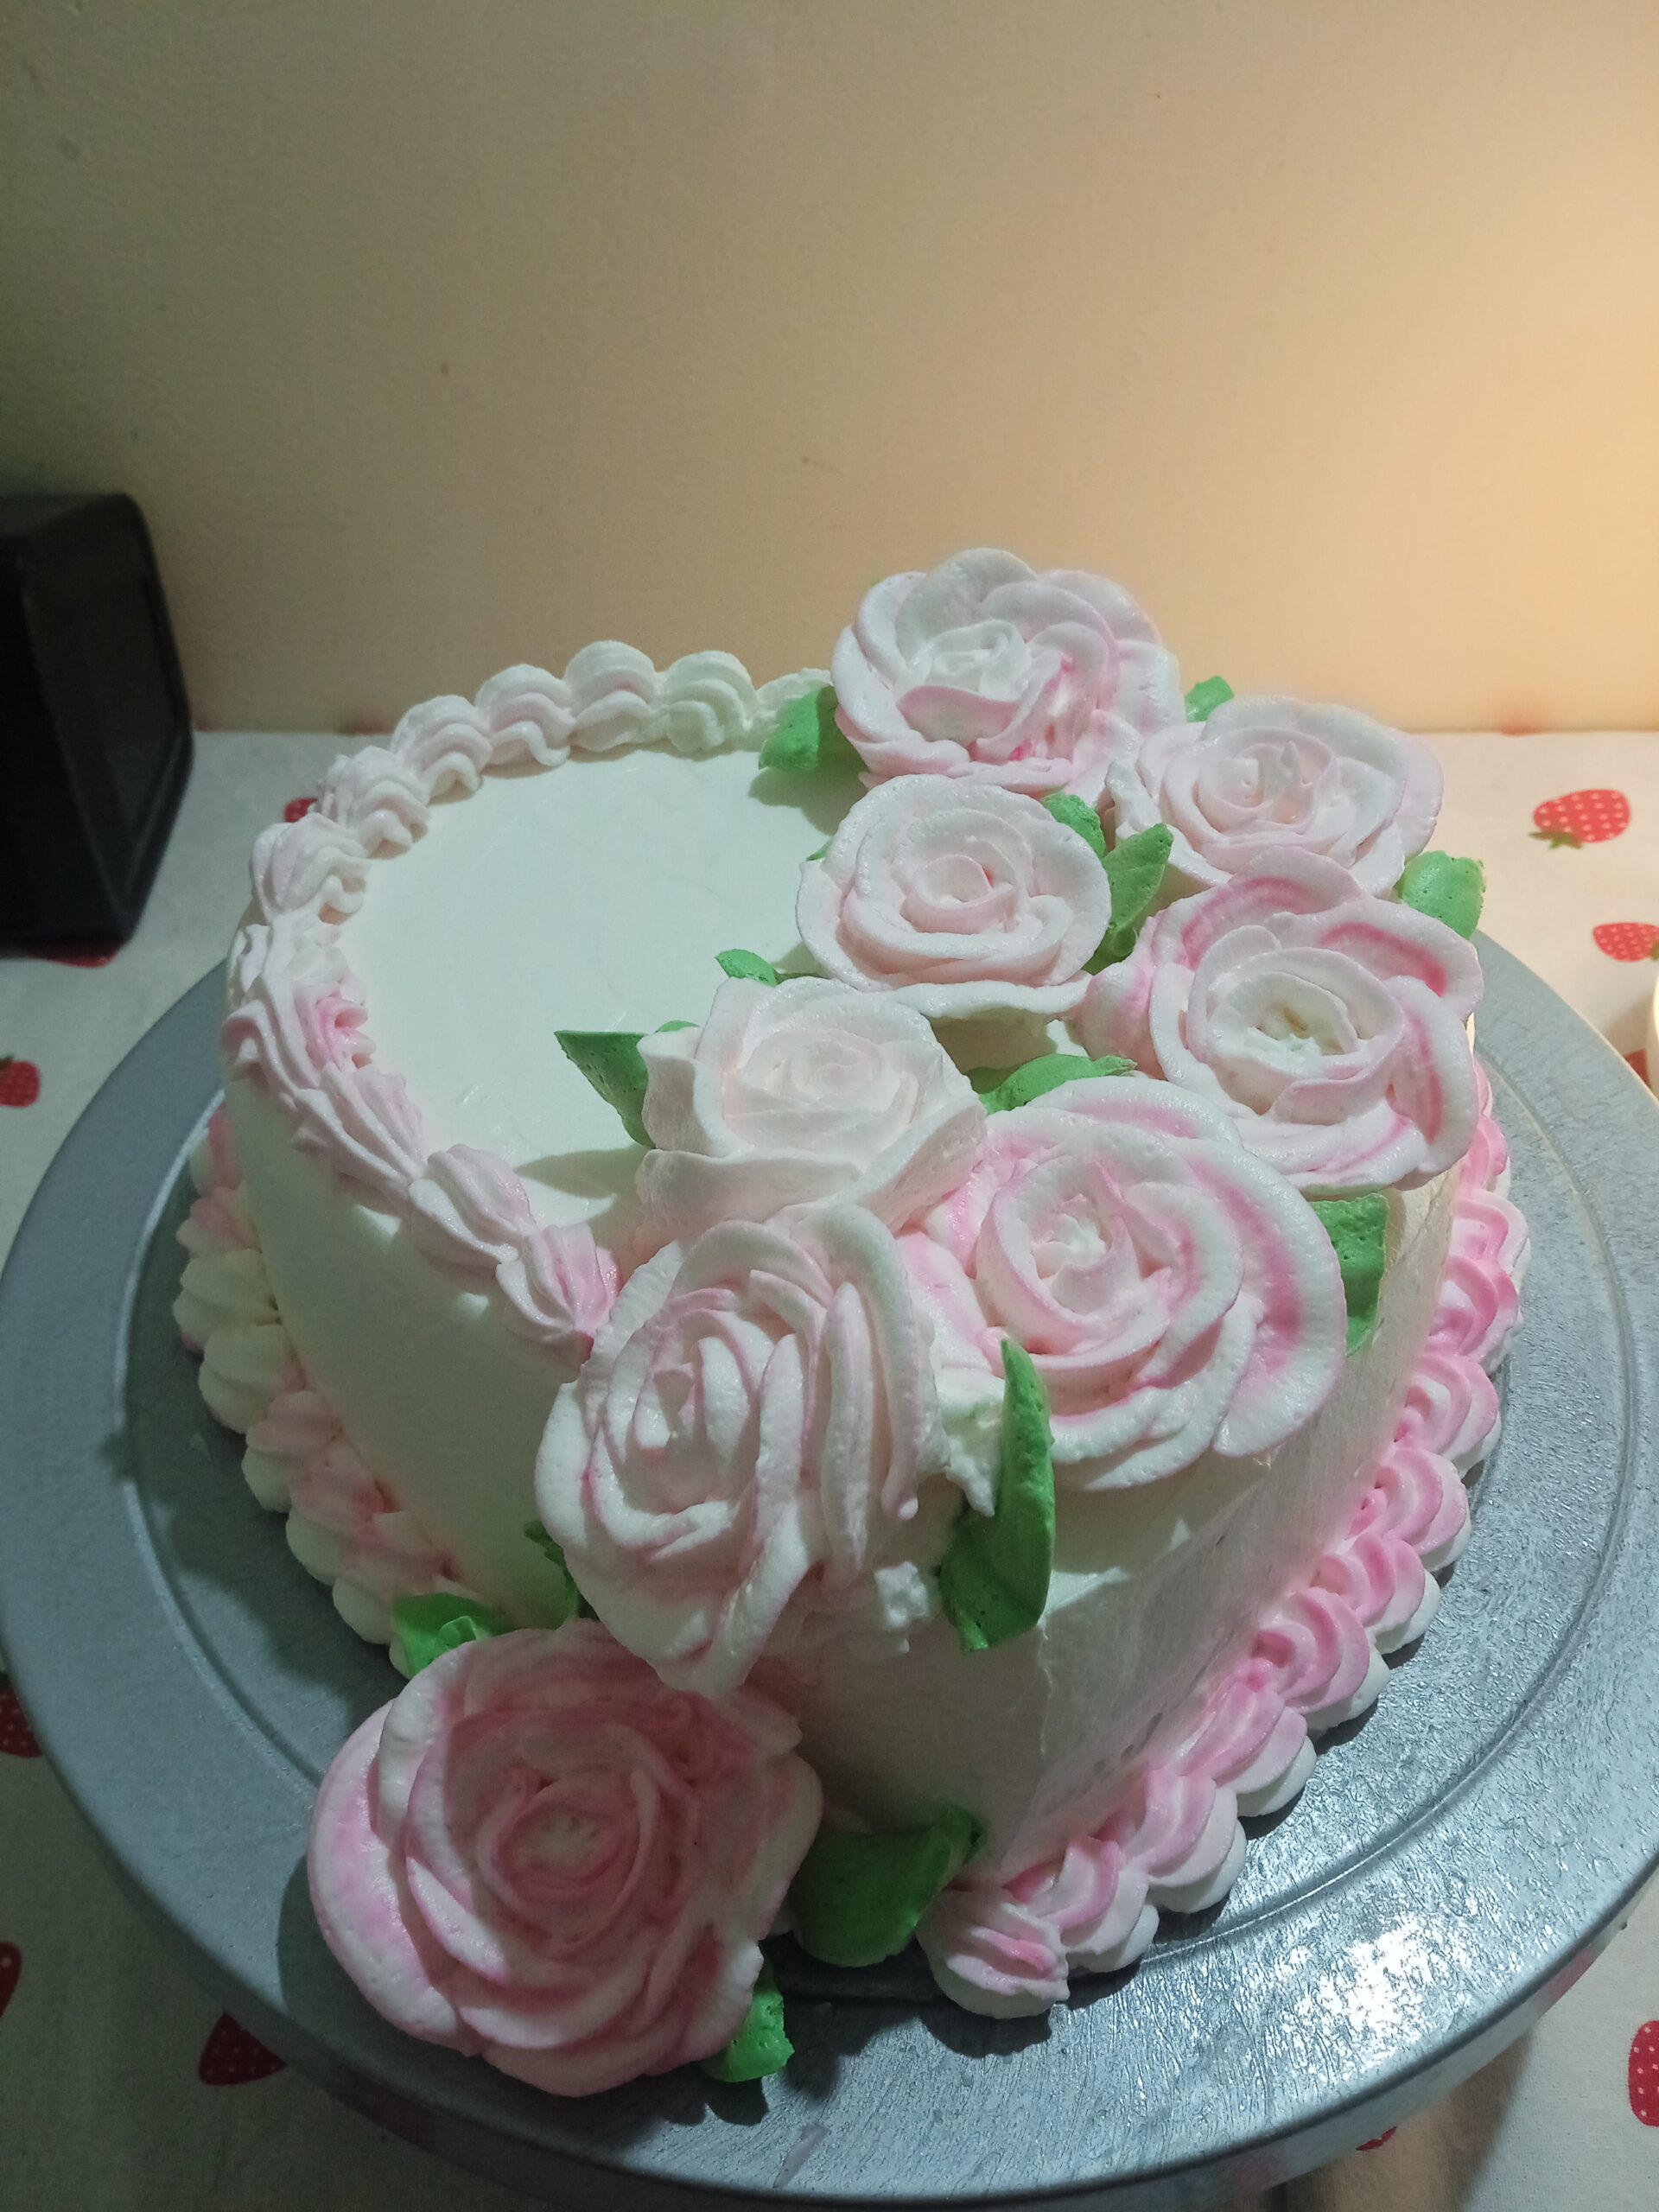 Rose Gold 21st Birthday Cake - Decorated Cake by Lily - CakesDecor